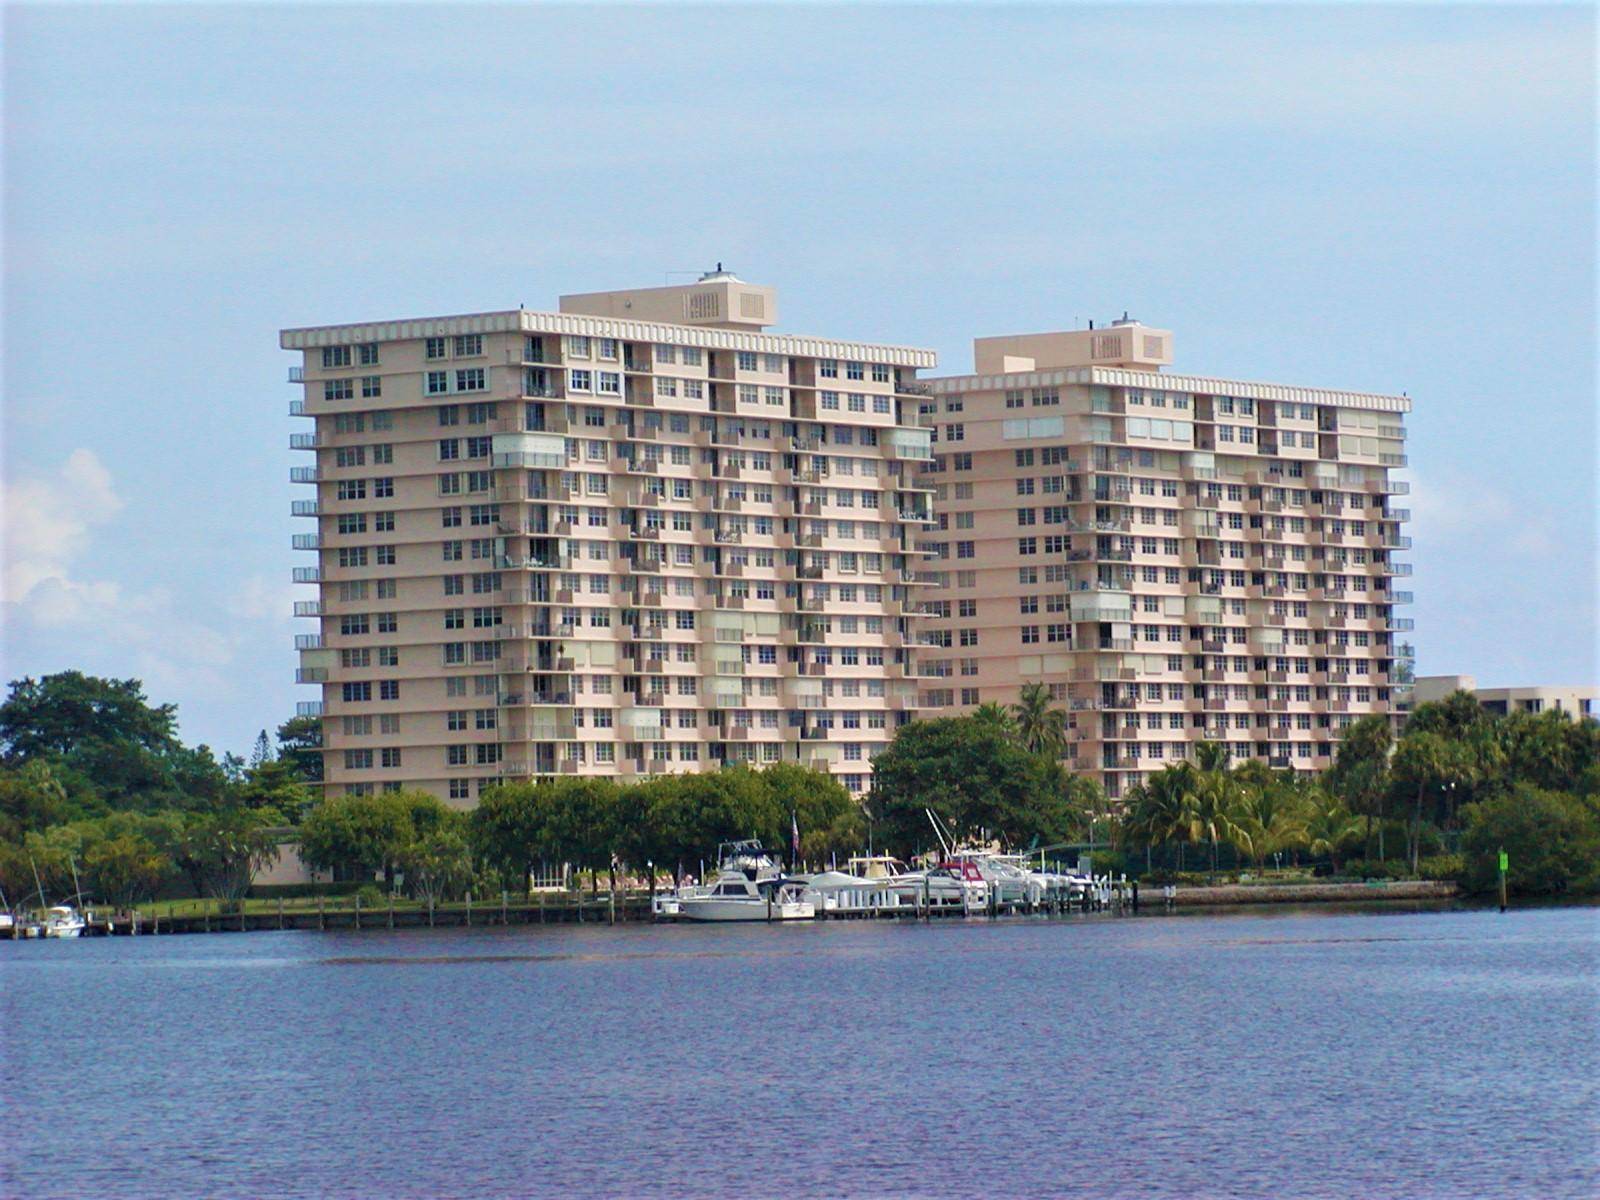 Enjoy fantastic panoramic views from the ocean to the intracoastal from this high floor unit with southern exposure.